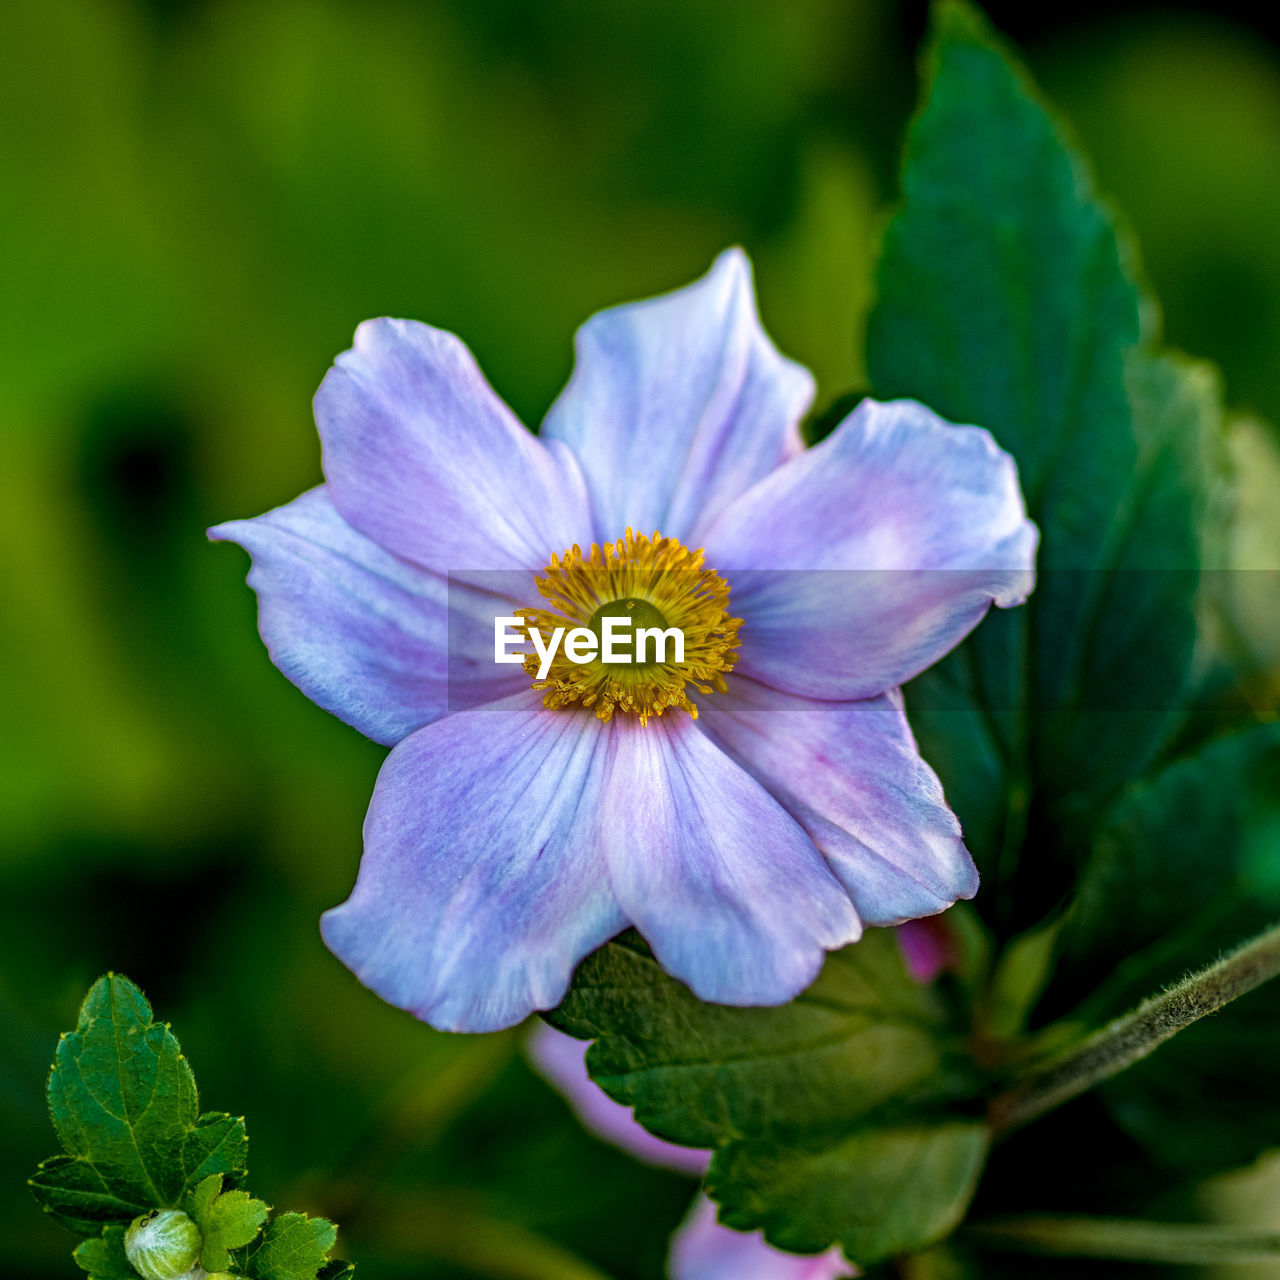 flowering plant, flower, plant, freshness, beauty in nature, flower head, close-up, inflorescence, macro photography, petal, nature, fragility, wildflower, growth, purple, plant part, no people, blossom, leaf, focus on foreground, botany, pollen, green, outdoors, summer, springtime, multi colored, selective focus